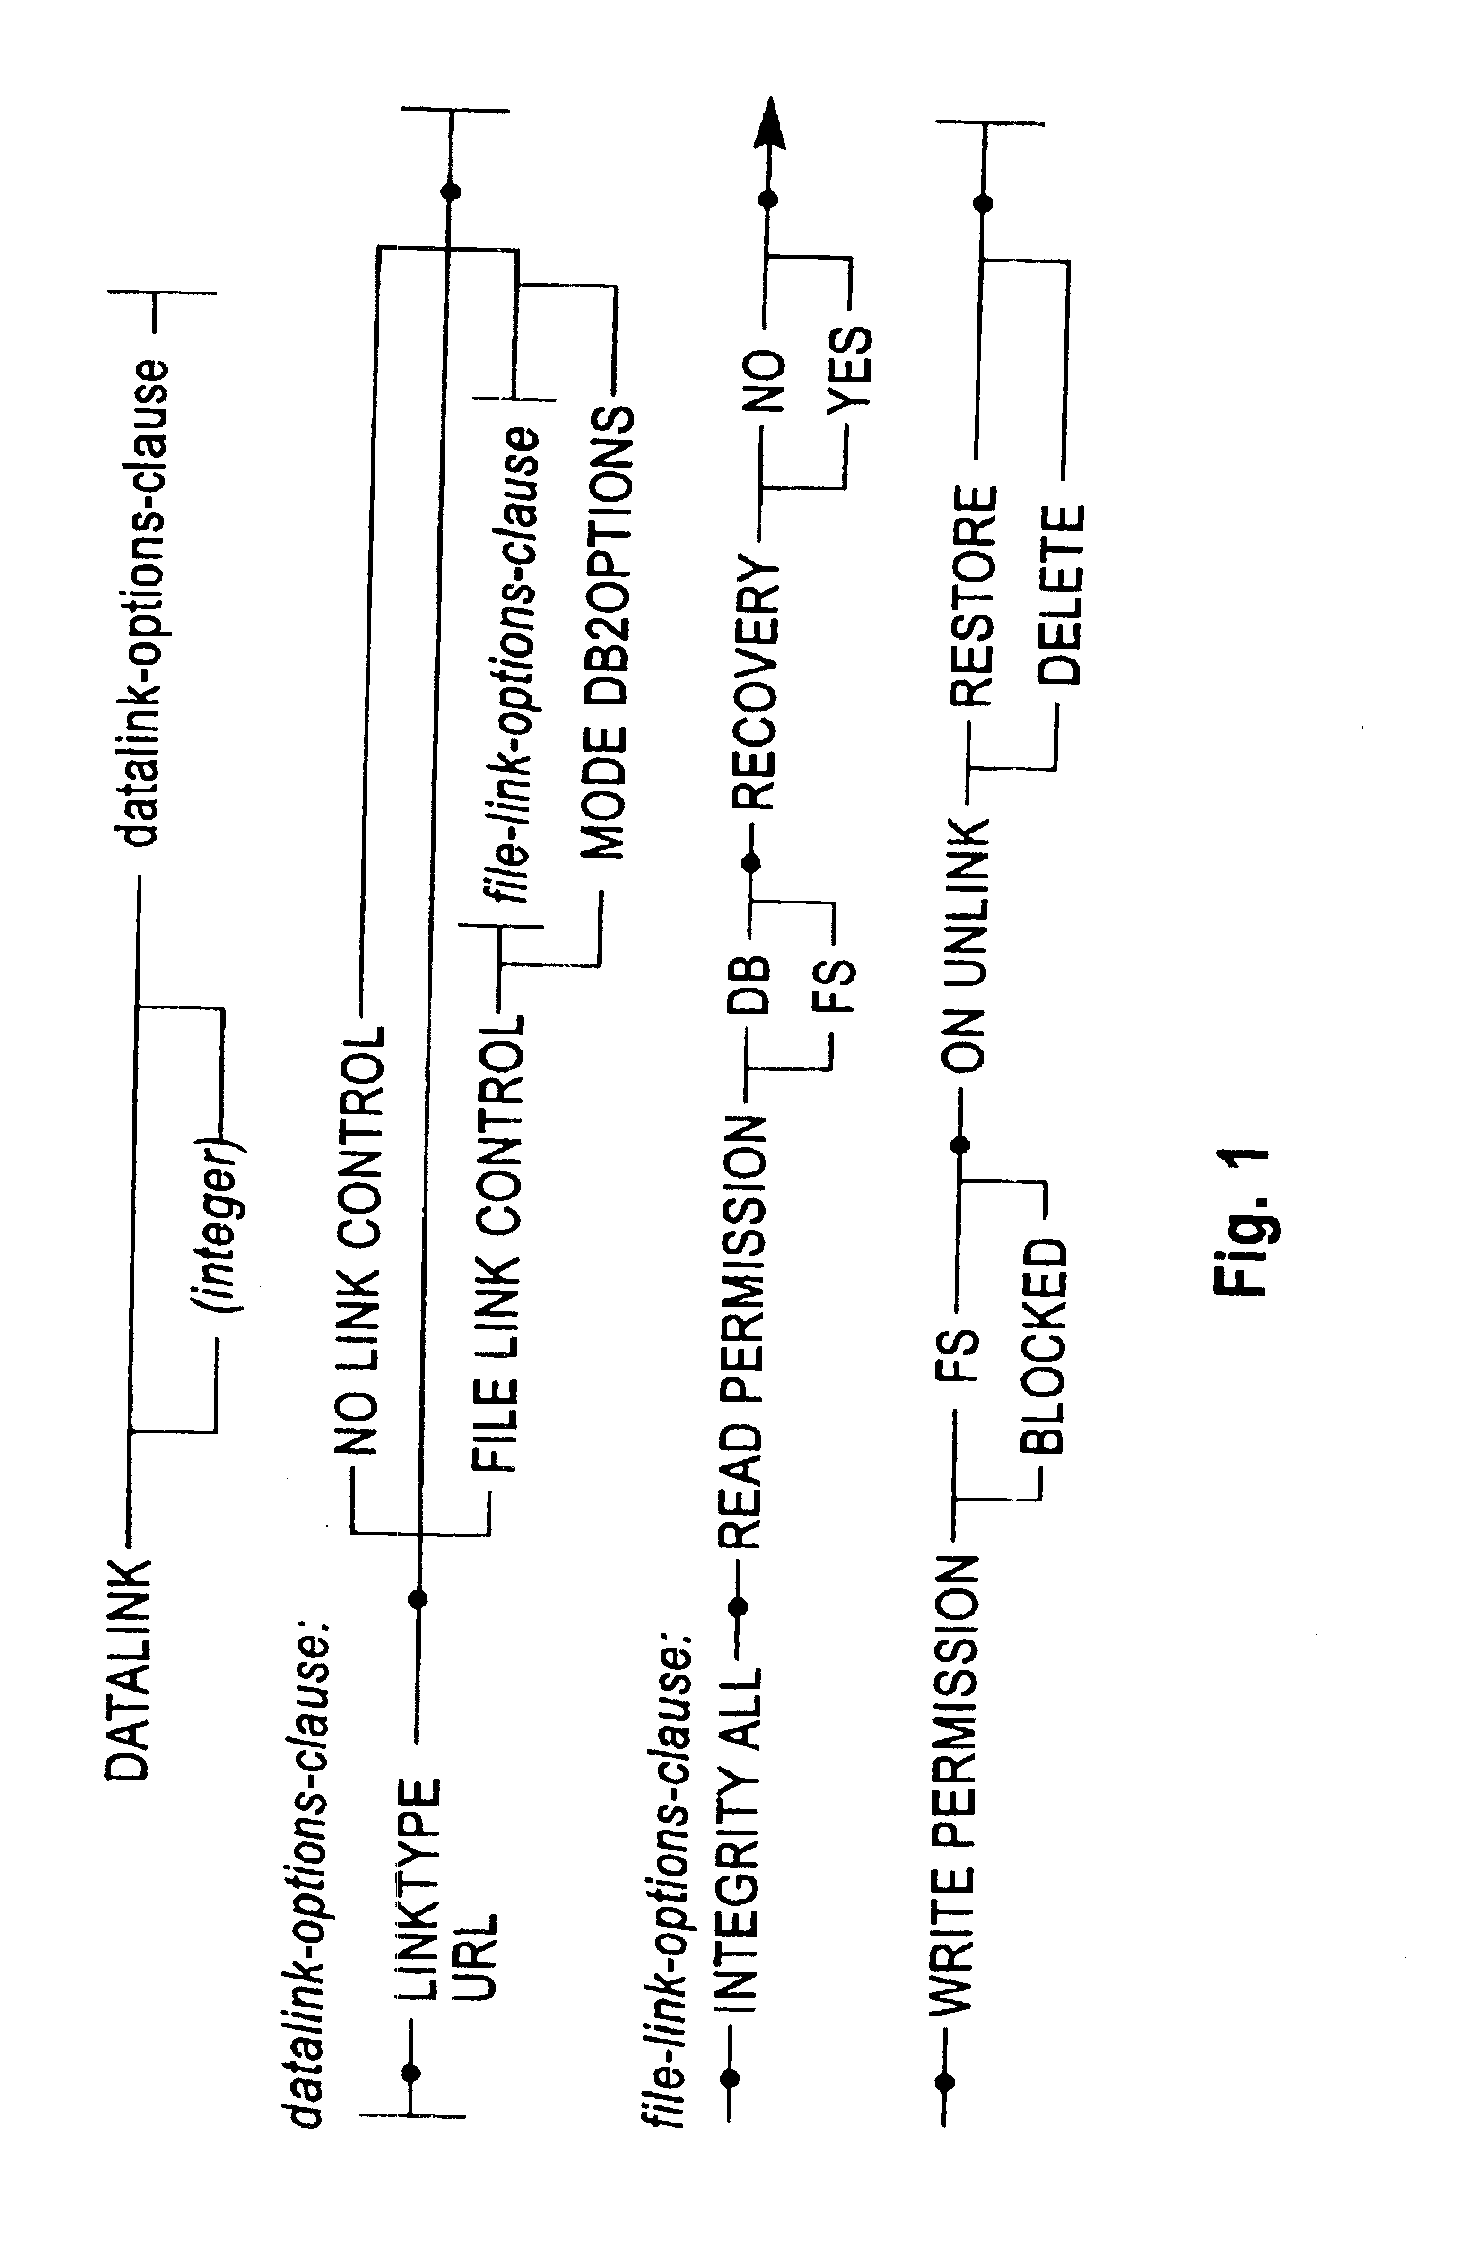 Method of maintaining data consistency in a loose transaction model